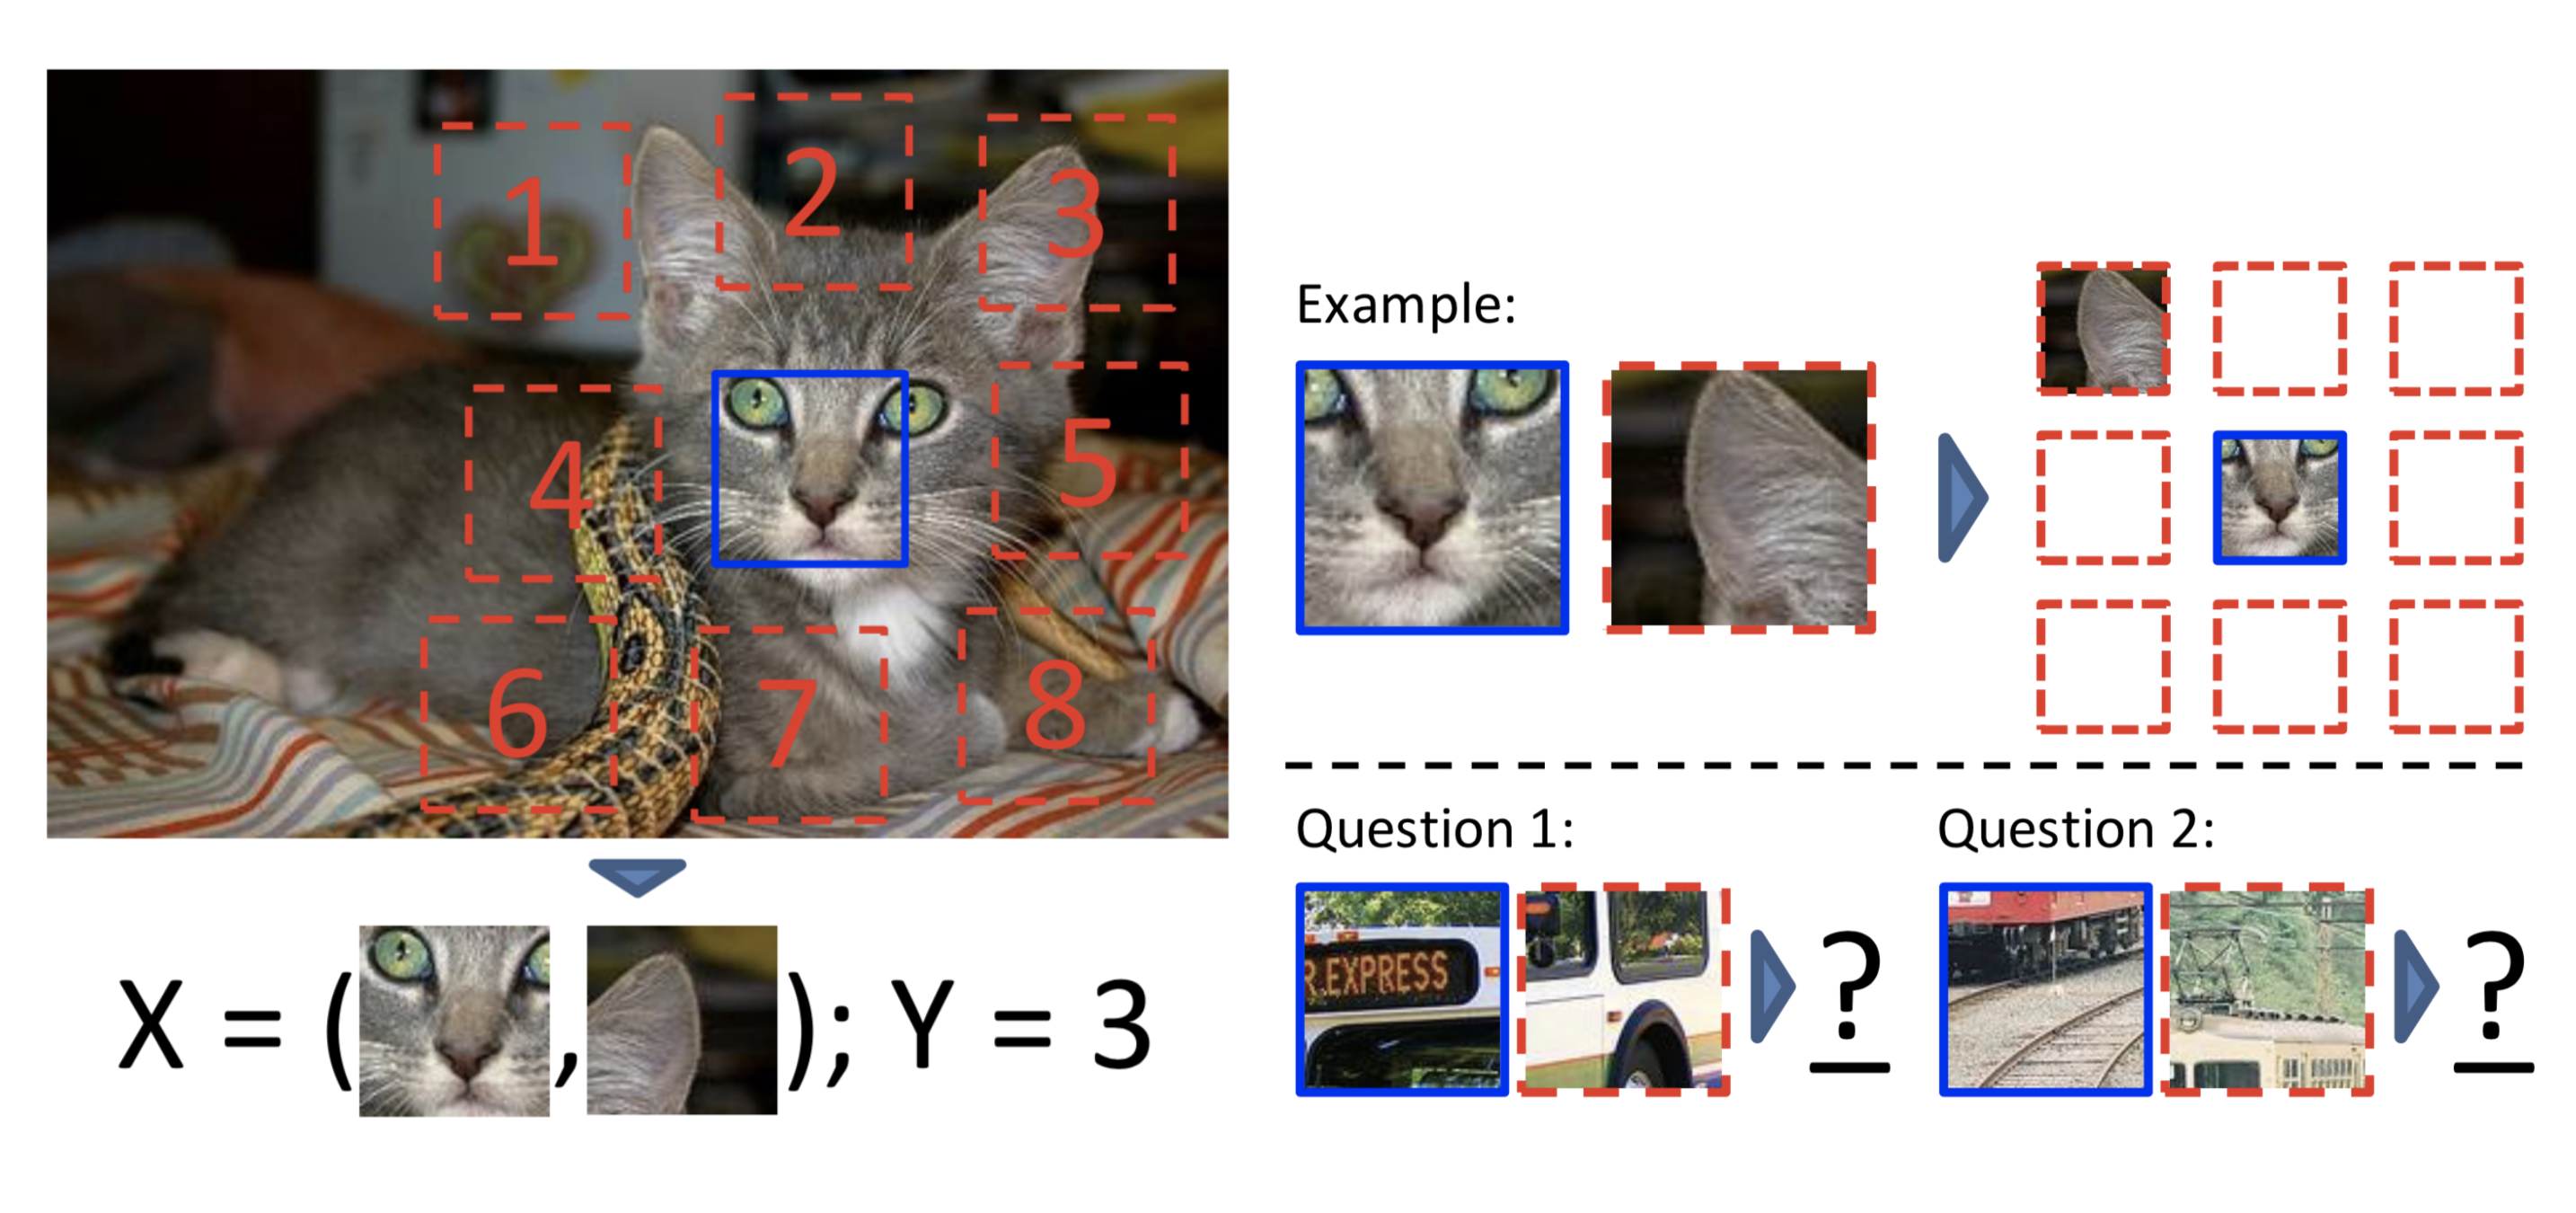 Self-supervised learning by context